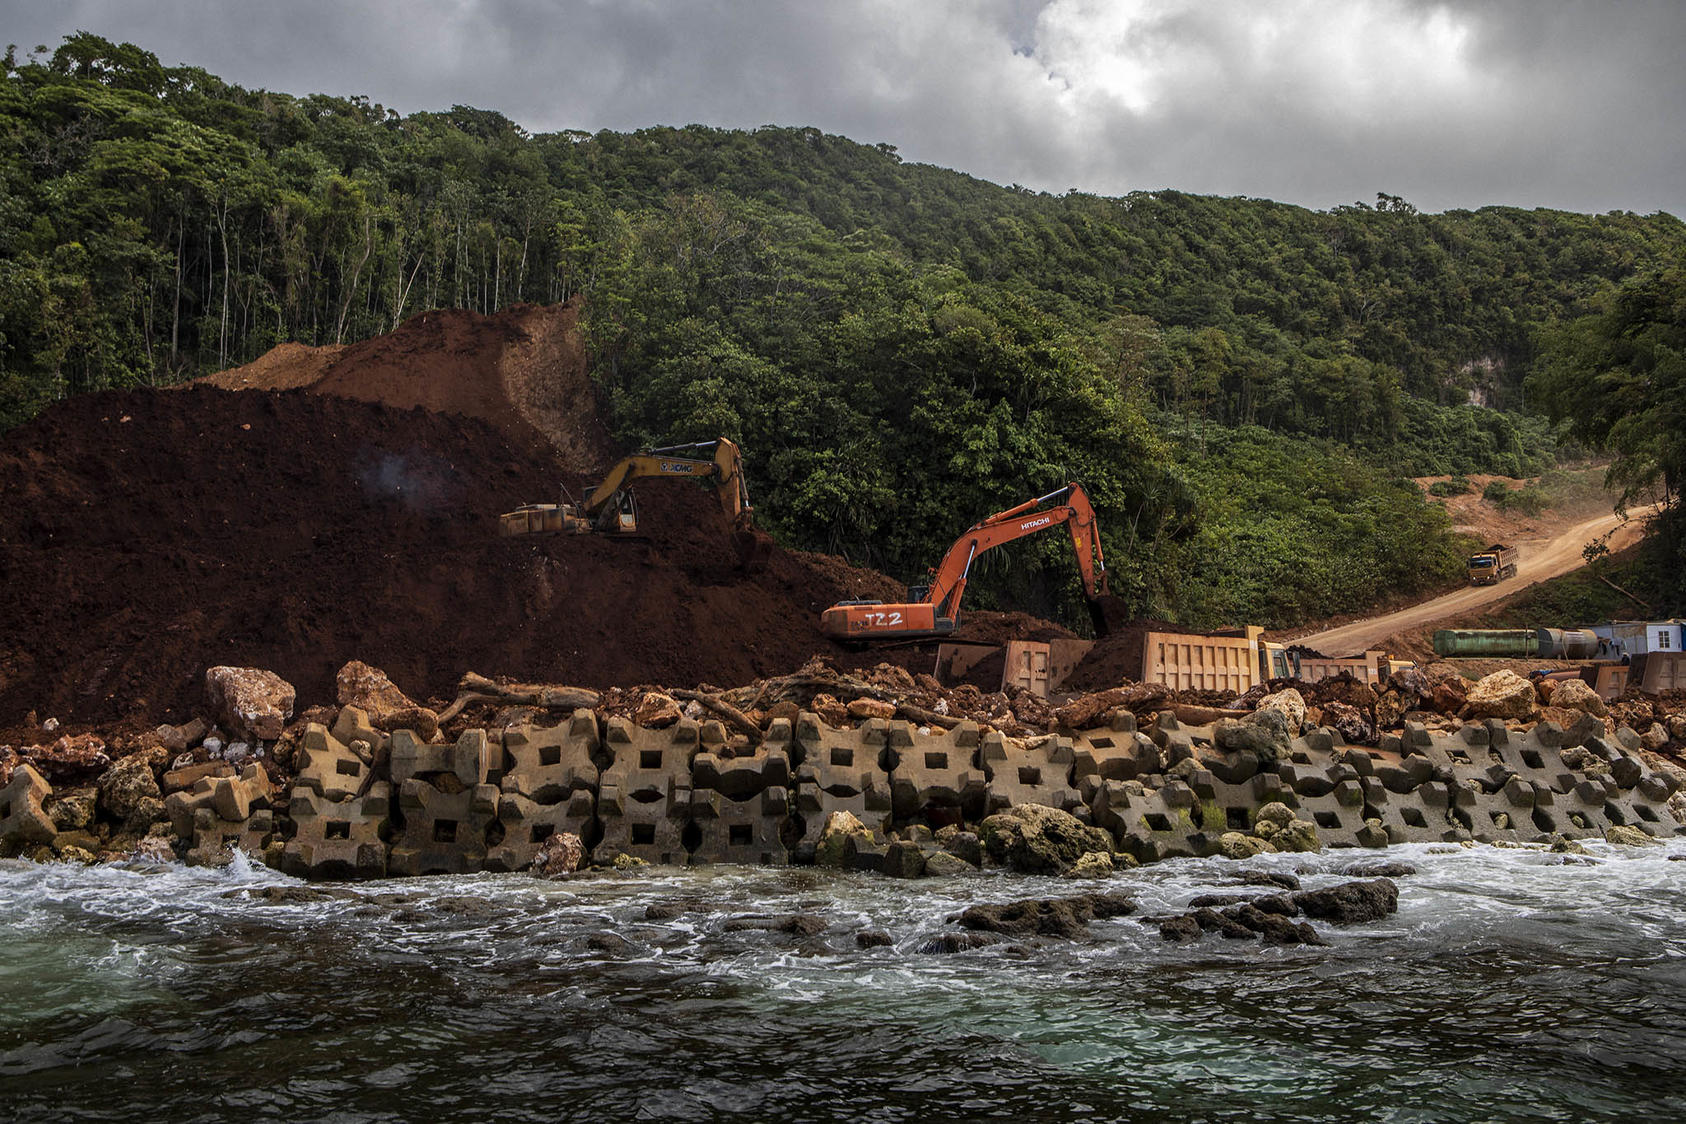 Bintan Mining’s bauxite operation on Rennell Island in the Solomon Islands. March 21, 2019. (David Maurice Smith/The New York Times)